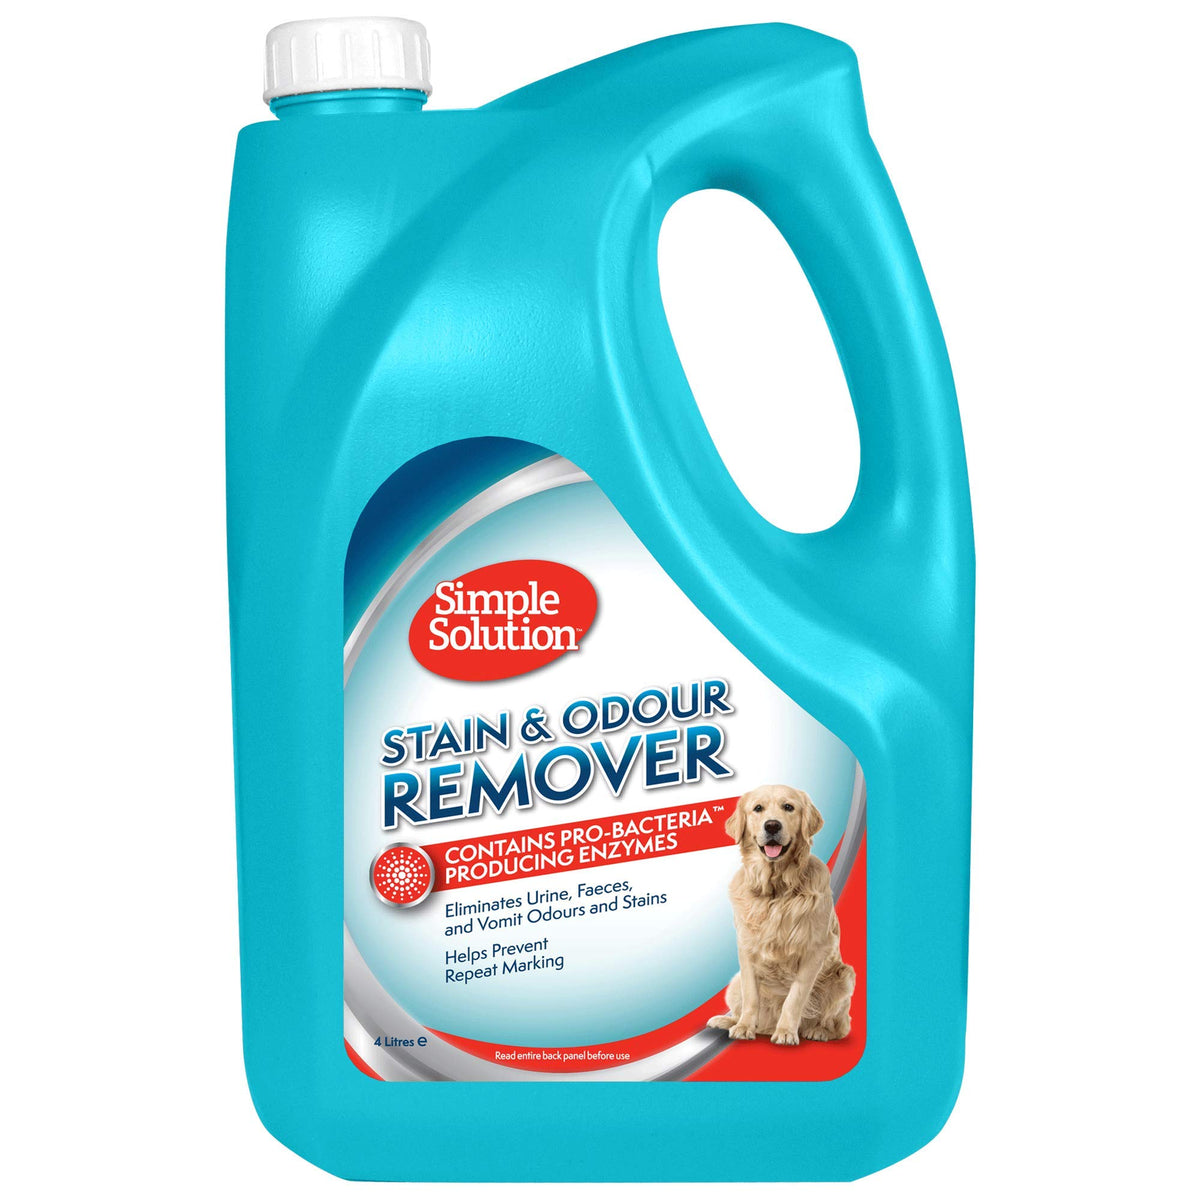 Simple Solution Dog Stain and Odour Remover | Enzymatic Cleaner with Pro-Bacteria Cleaning Power - 4 Litres